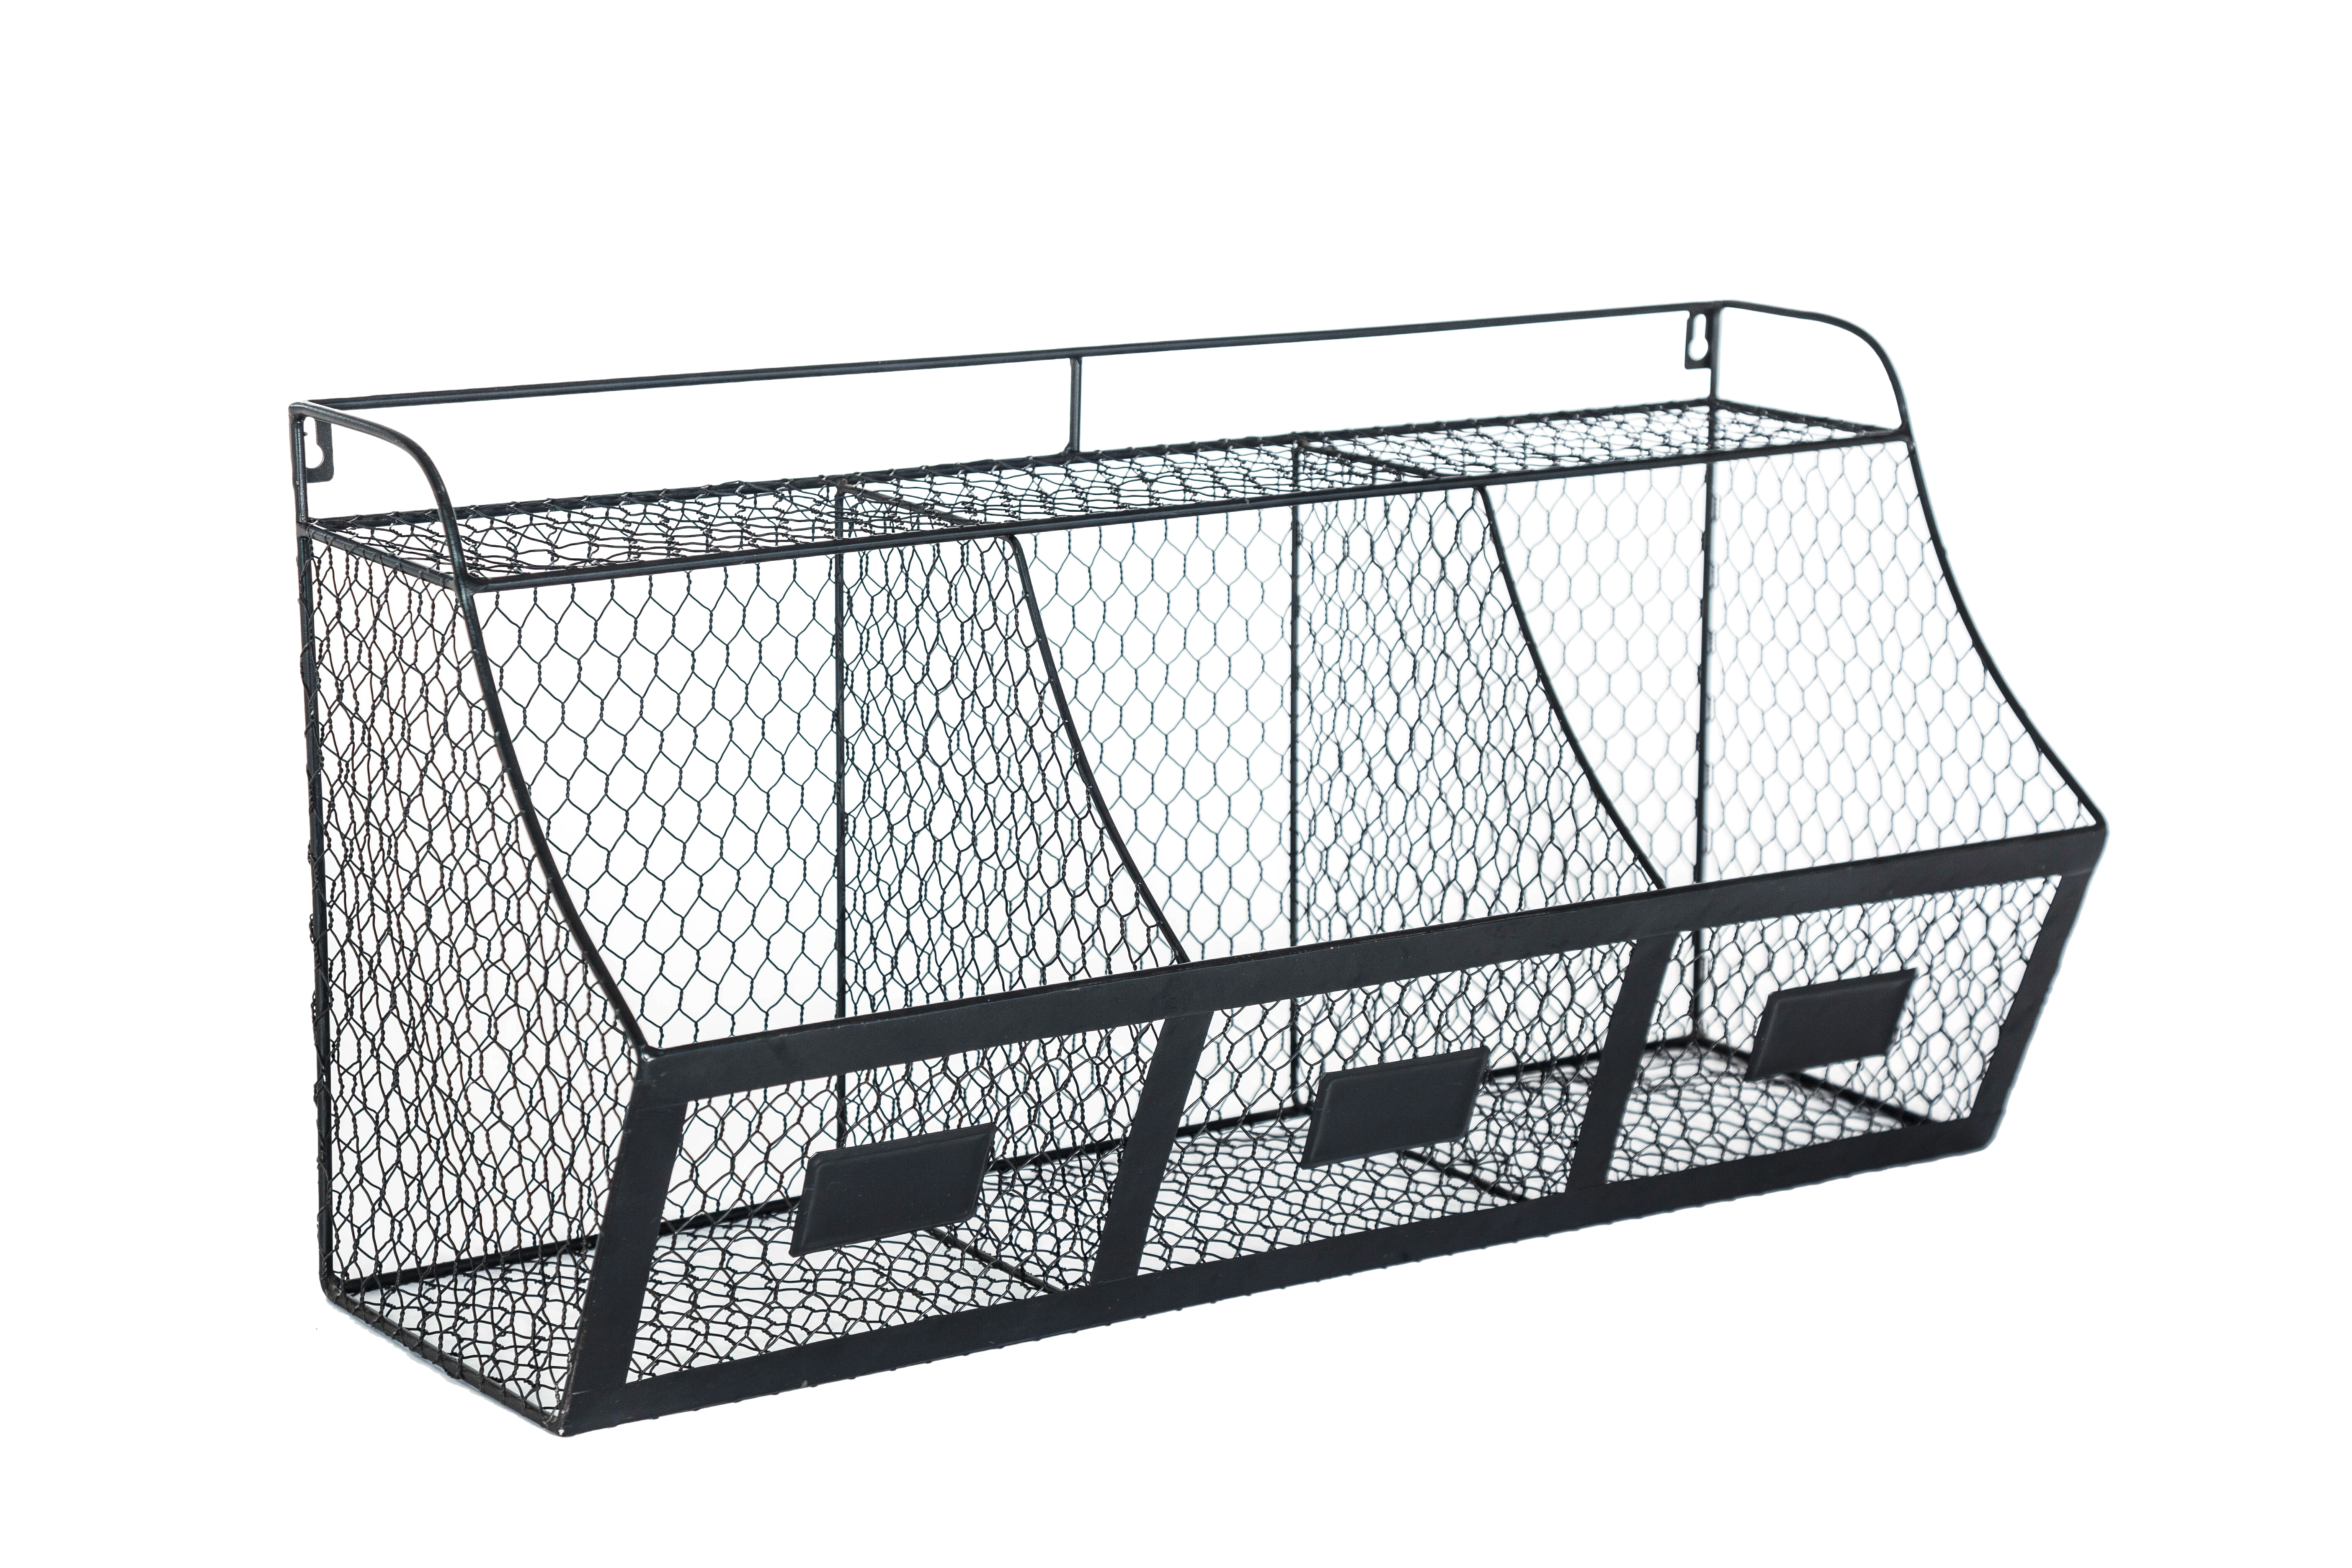 K-Cliffs 3 Compartment Basket, Large Wall Mount Metal Storage Hanging Fruit Organizer  Wire Baskets  Black Dimensions; 26x13x10 - image 3 of 5